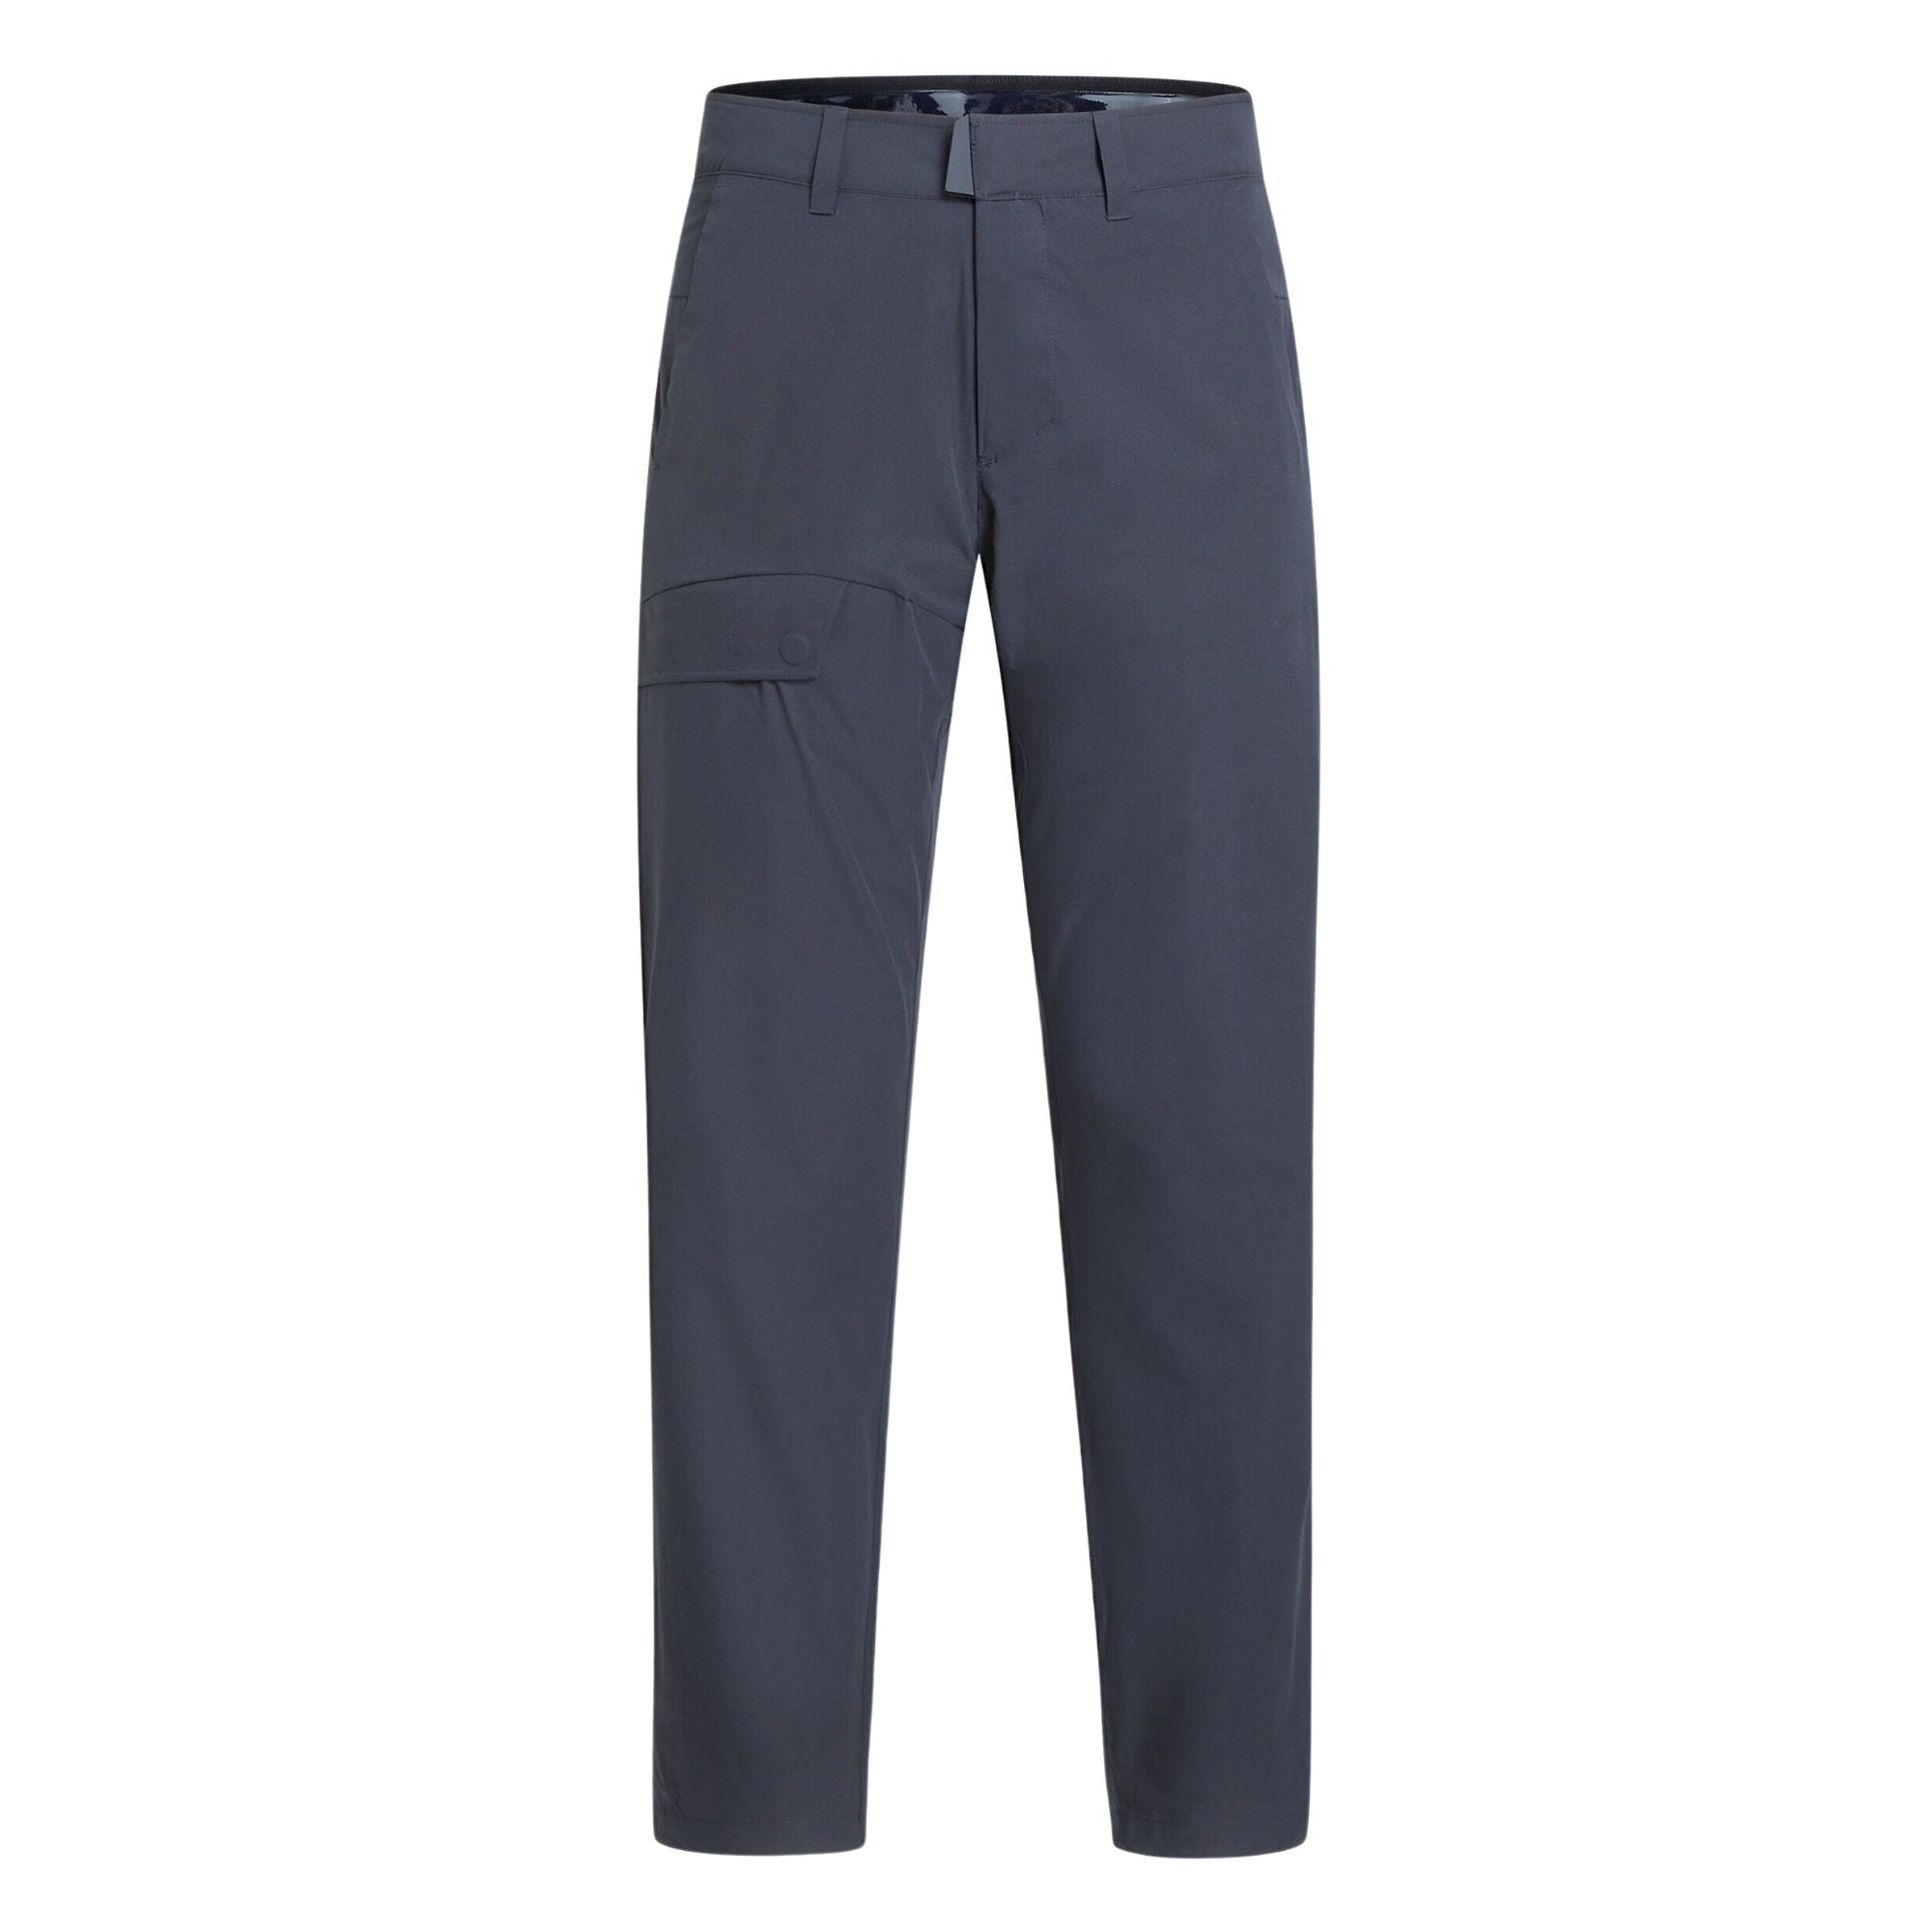 All In Motion Water Resistant Sweat Pants for Men